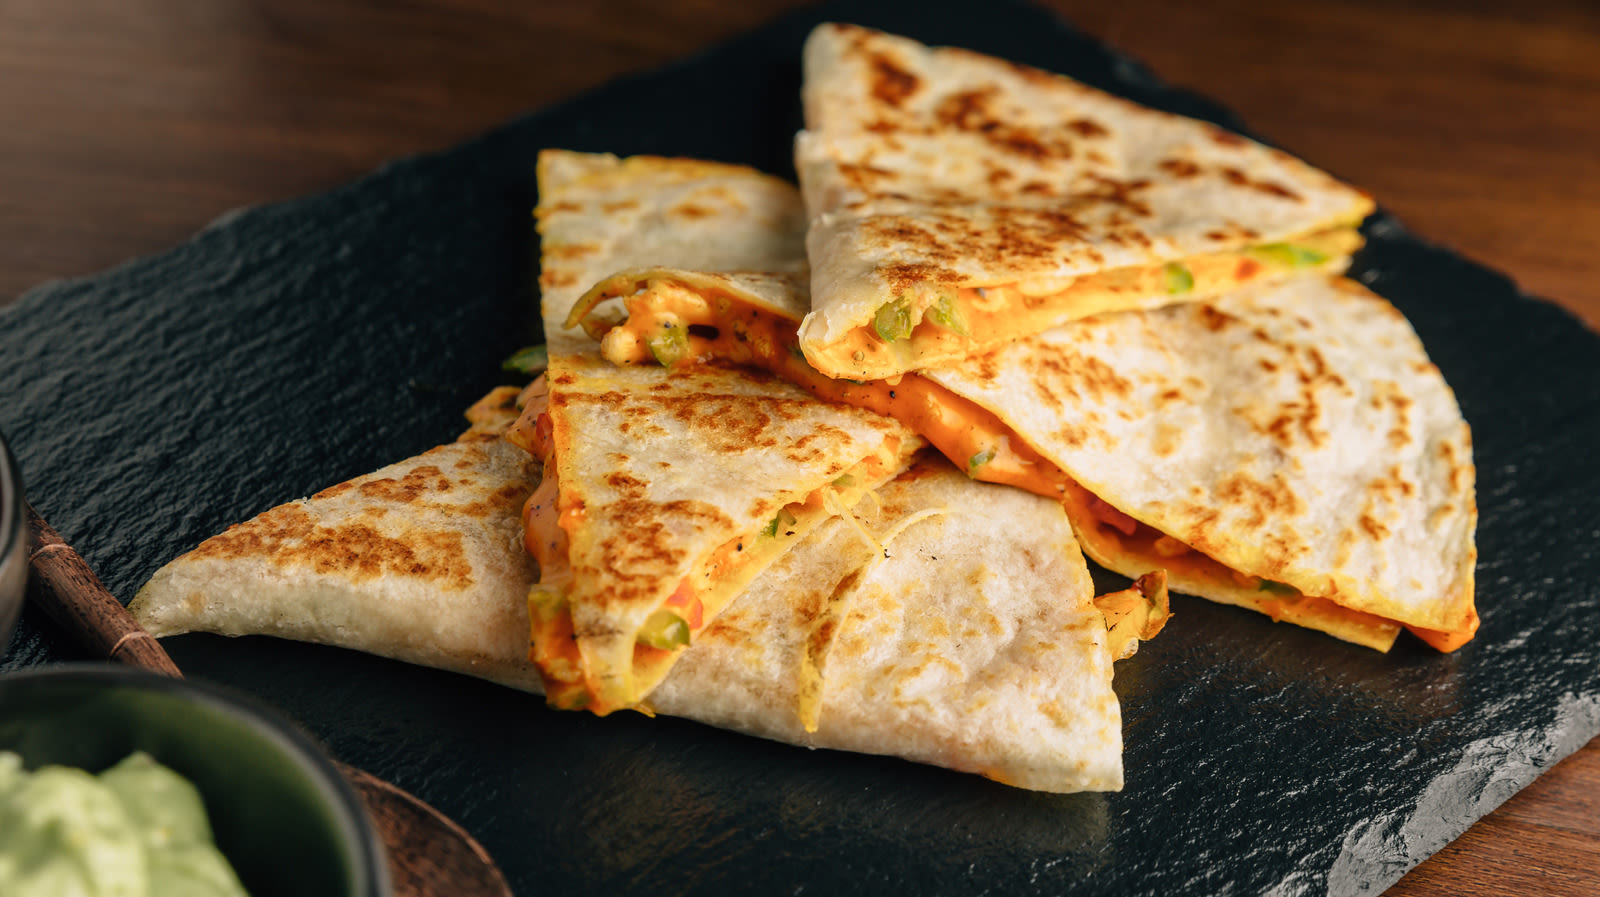 Give Your Quesadilla A Satisfying Crunch With Leftover Tortilla Chips